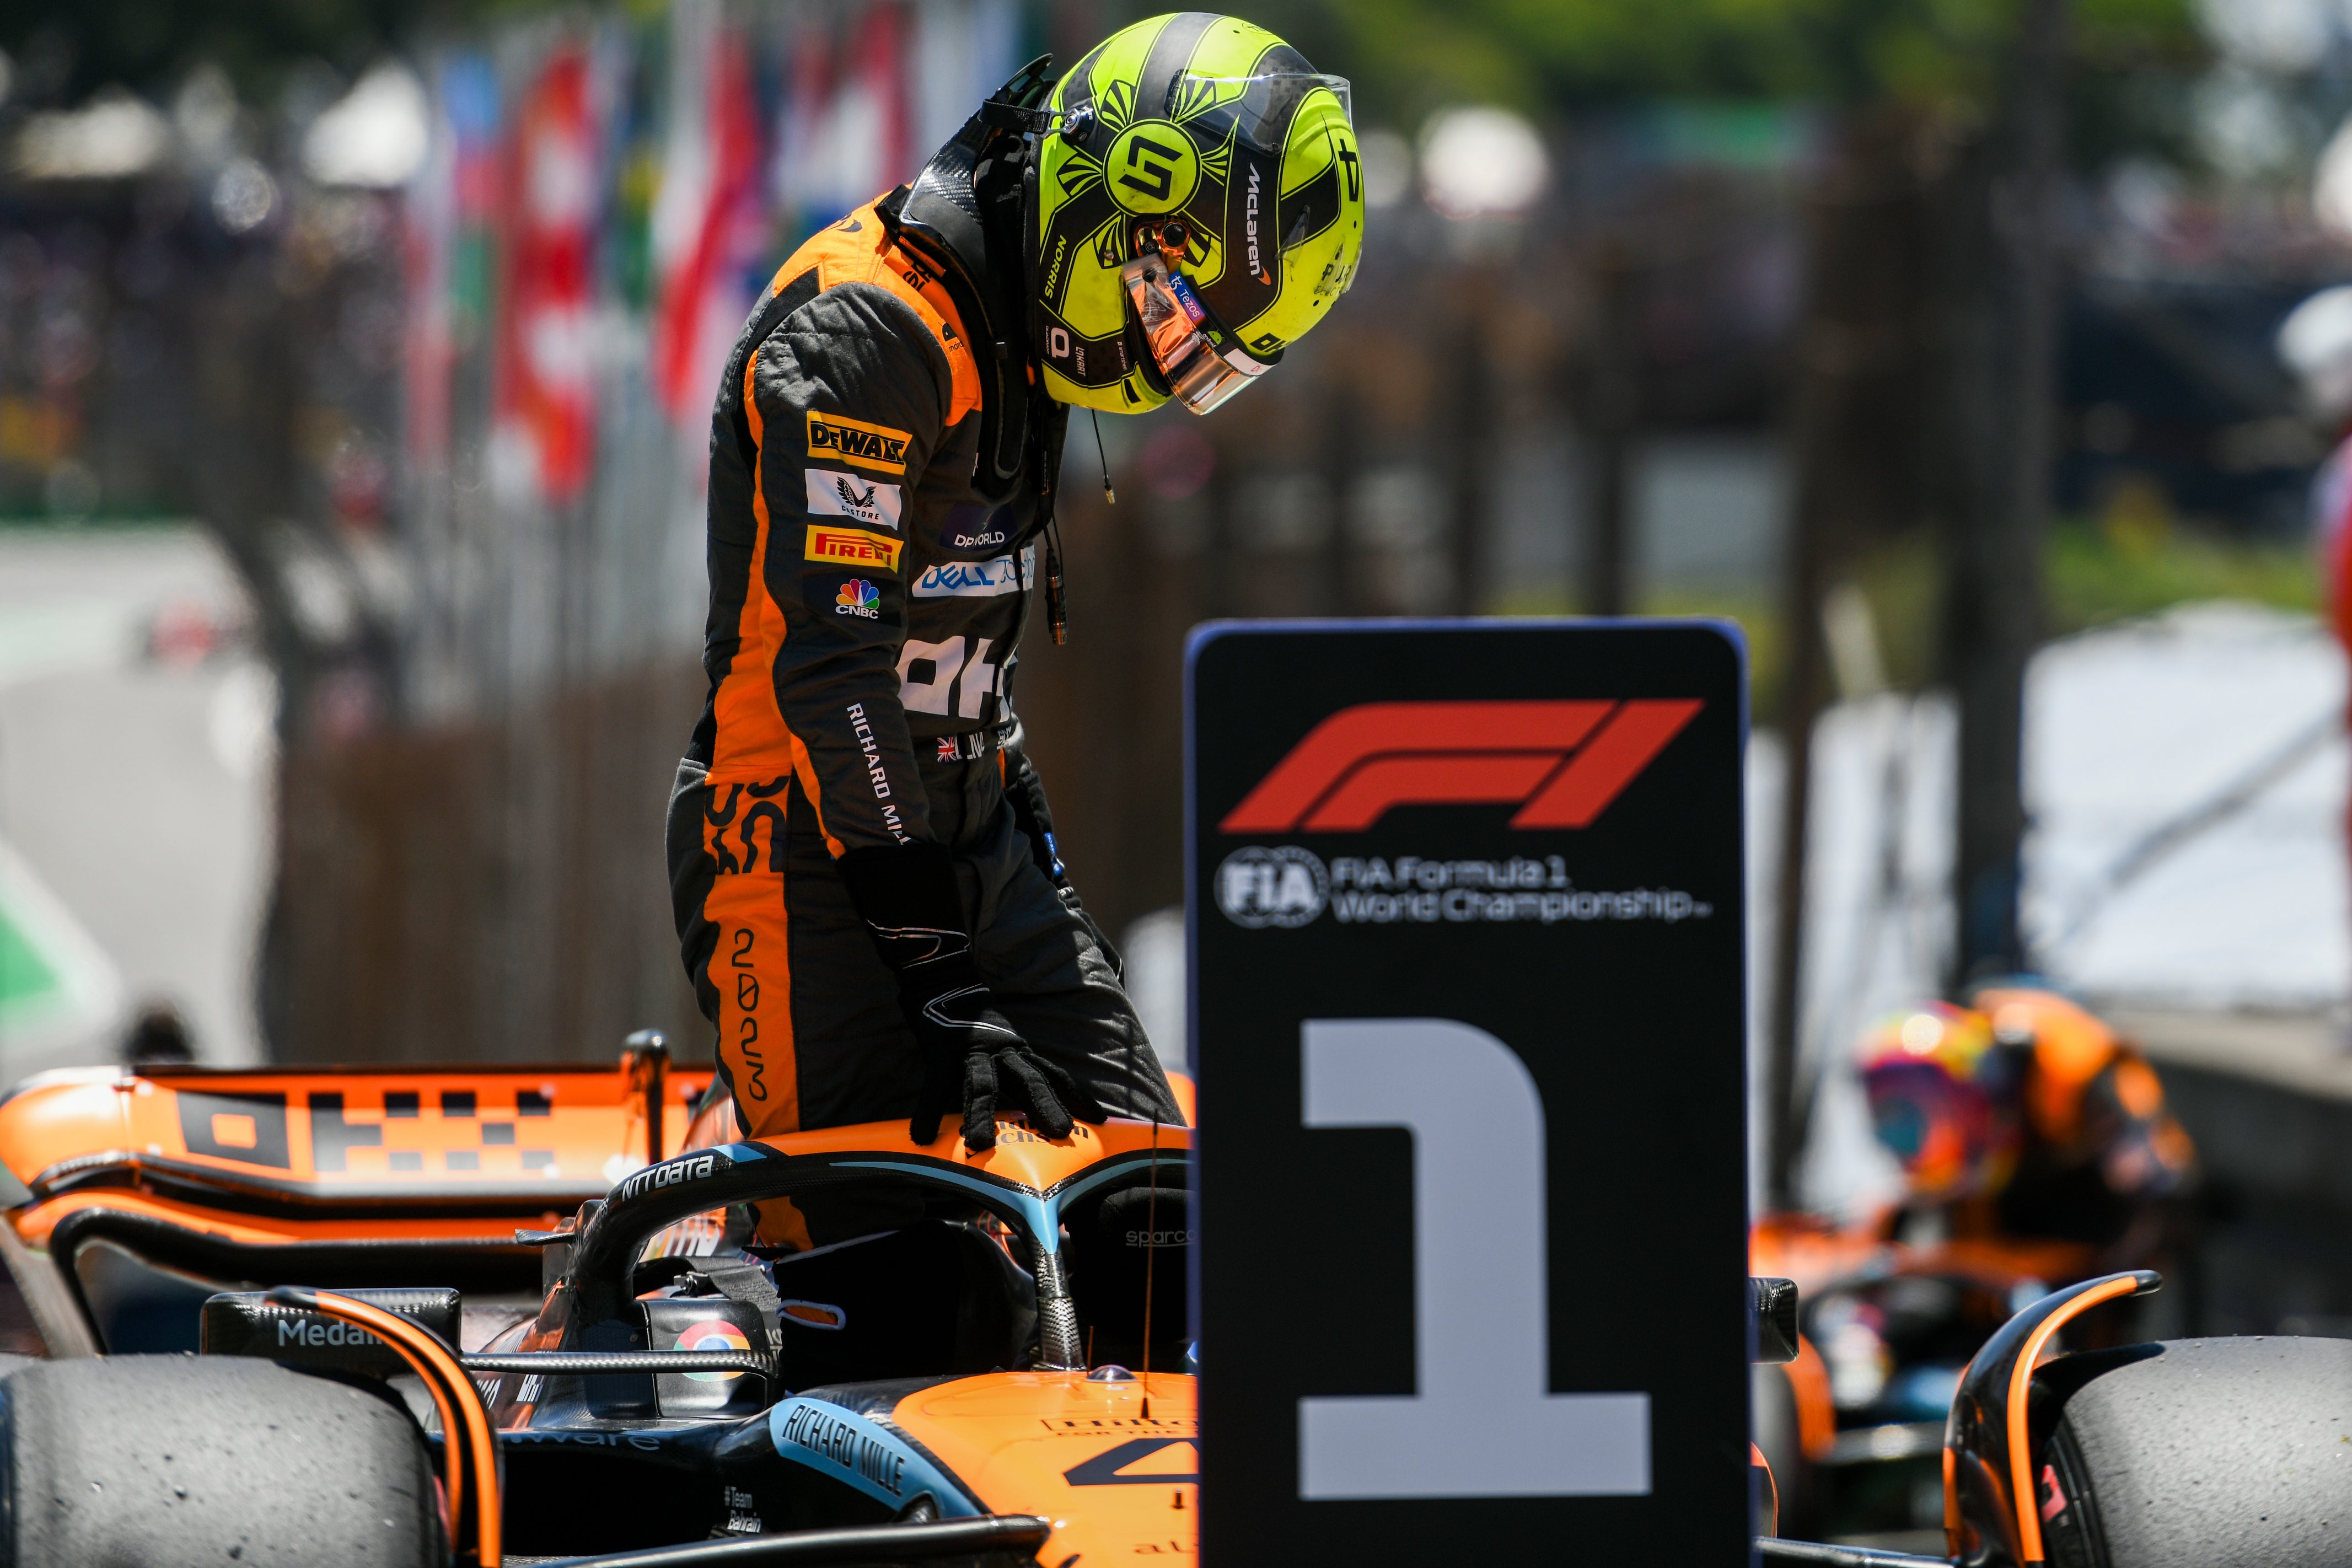 Lando Norris is on pole for the sprint race